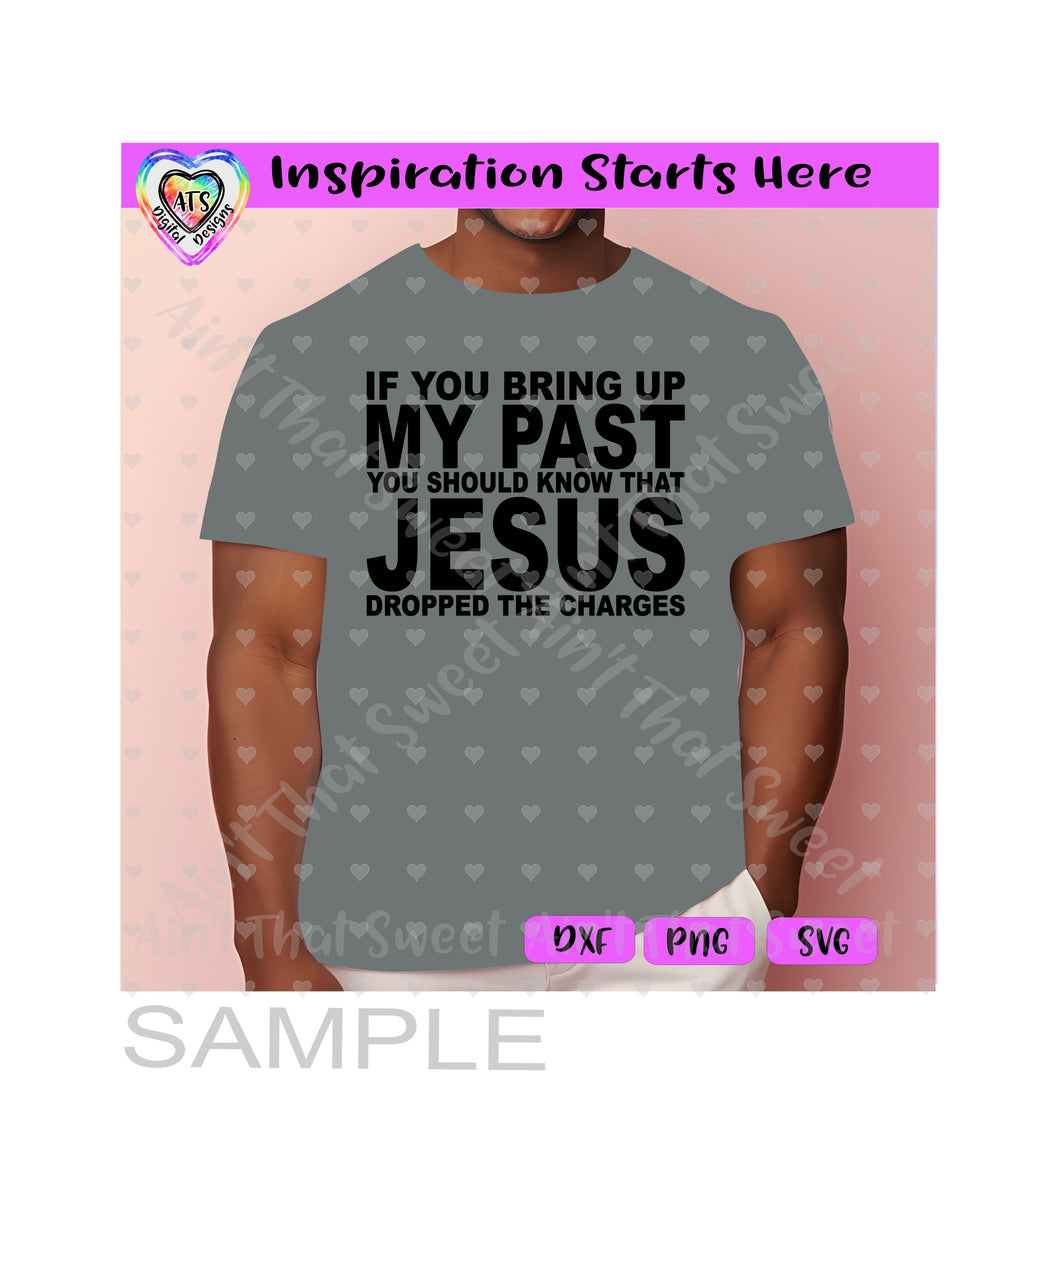 If You Bring Up My Past | Know That Jesus Dropped The Charges - Transparent PNG SVG DXF - Silhouette, Cricut, ScanNCut